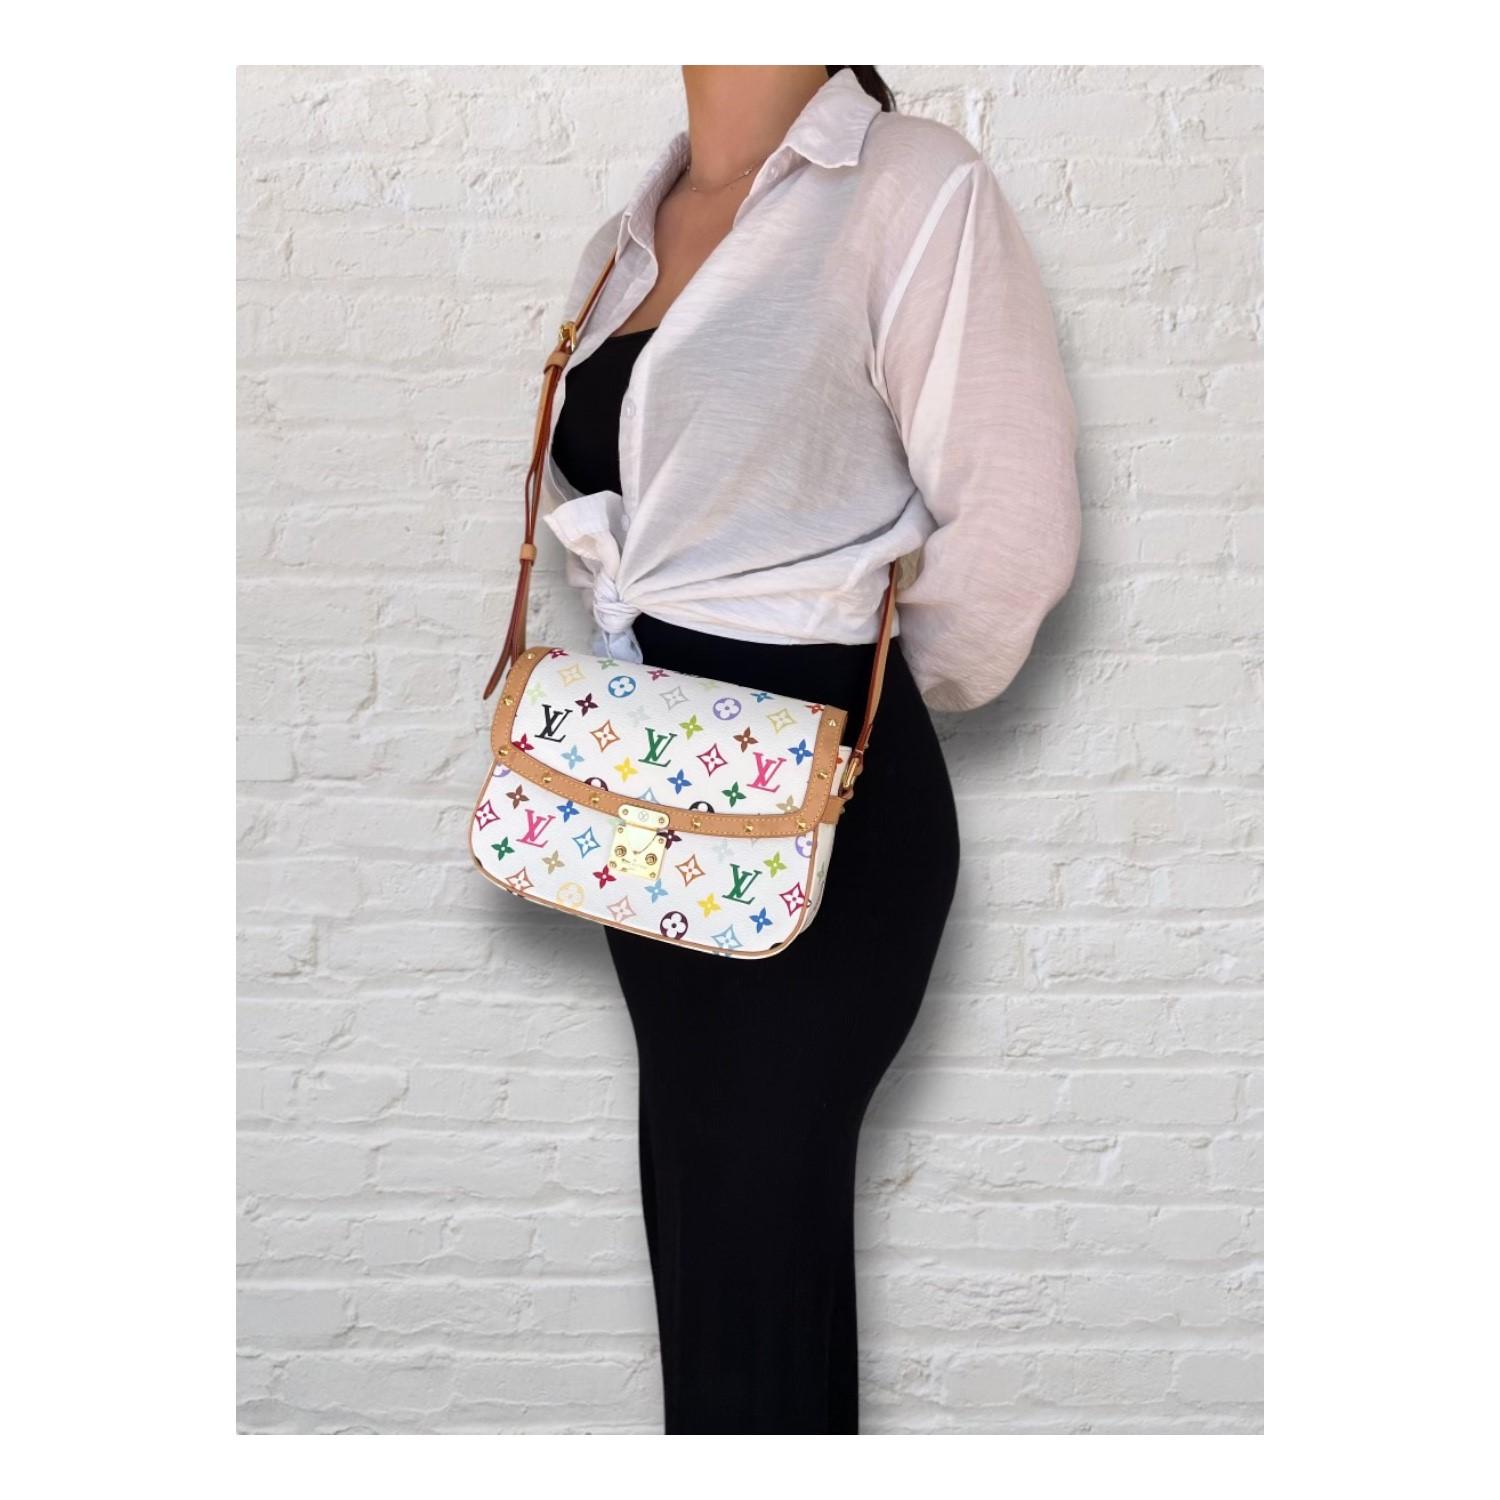 This Louis Vuitton Louis Vuitton Monogram Multicolor Sologne was made in France and it is finely crafted of the Louis Vuitton Monogram Multicolor coated canvas with leather trimming and gold-tone hardware features. It has an adjustable leather